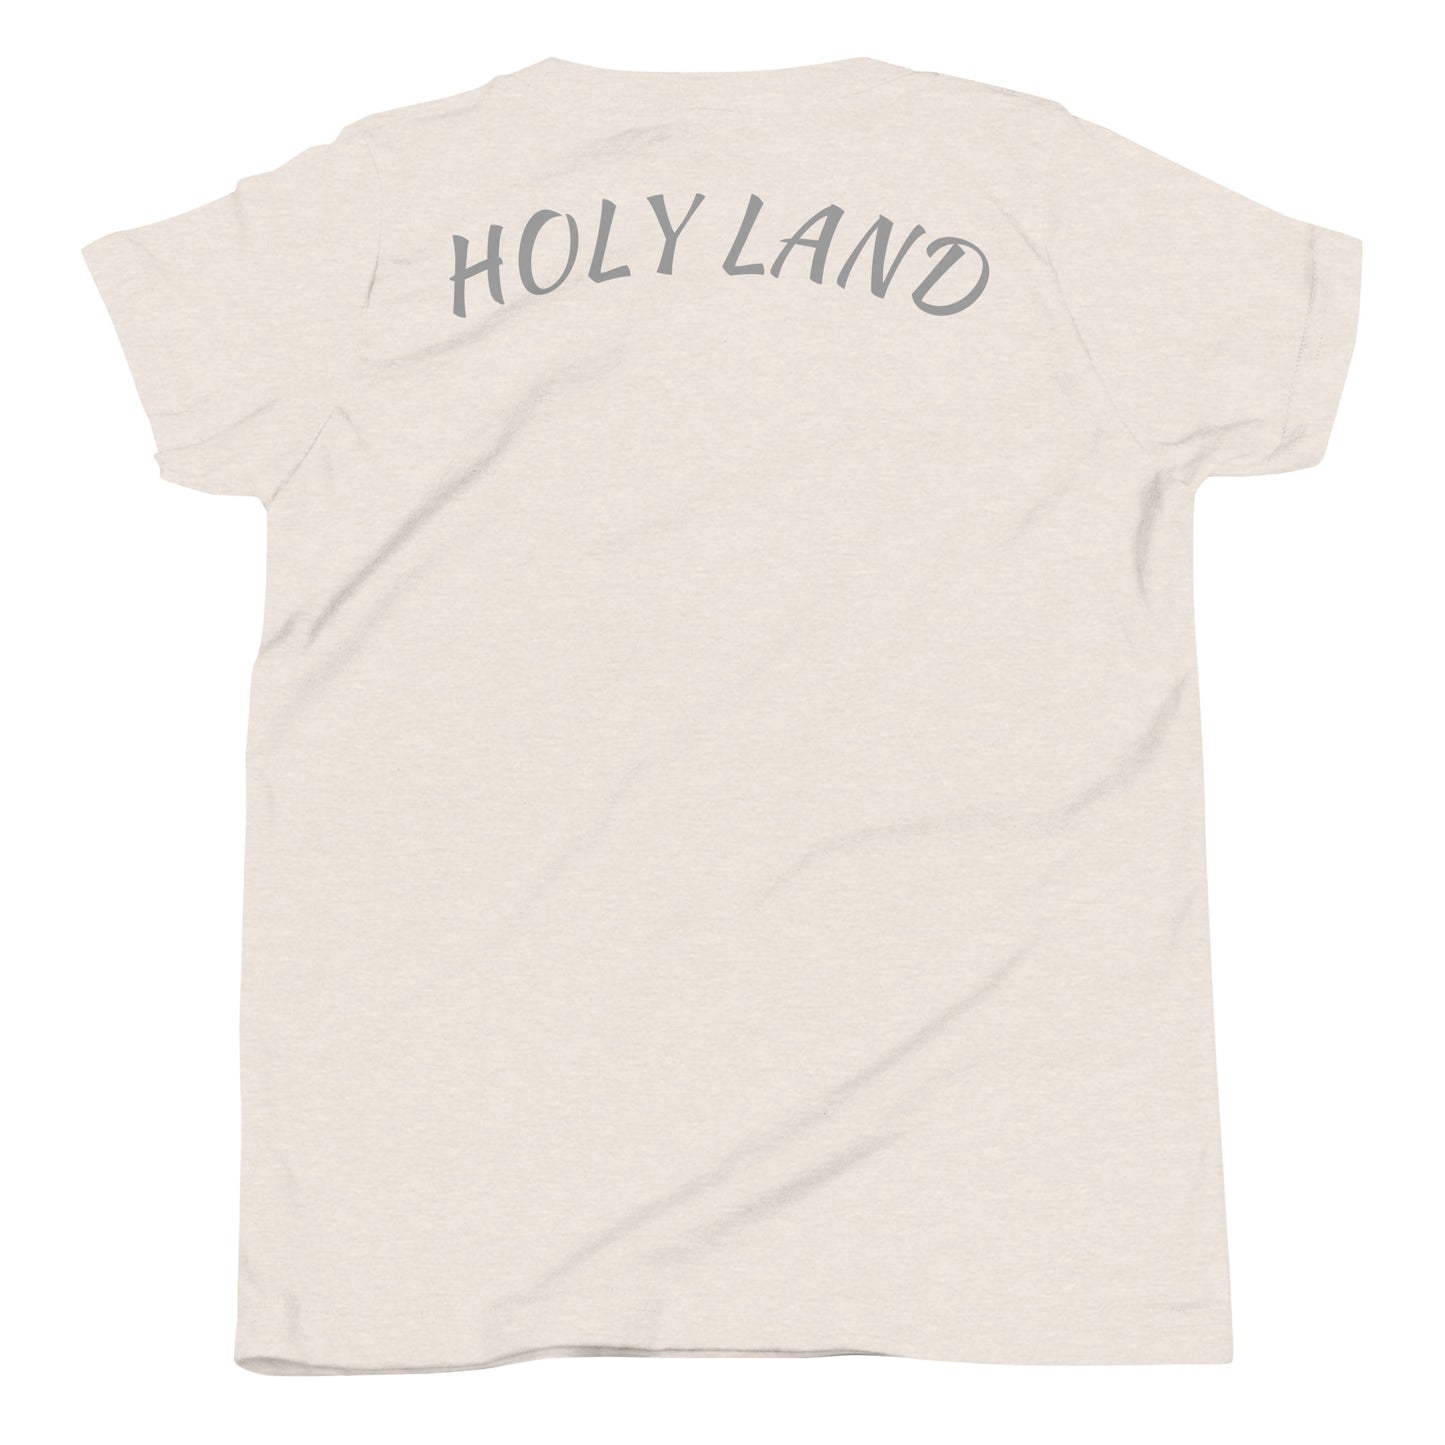 Holy Land + فلسطين For Youth Short Sleeve T-Shirt By Halal Cultures